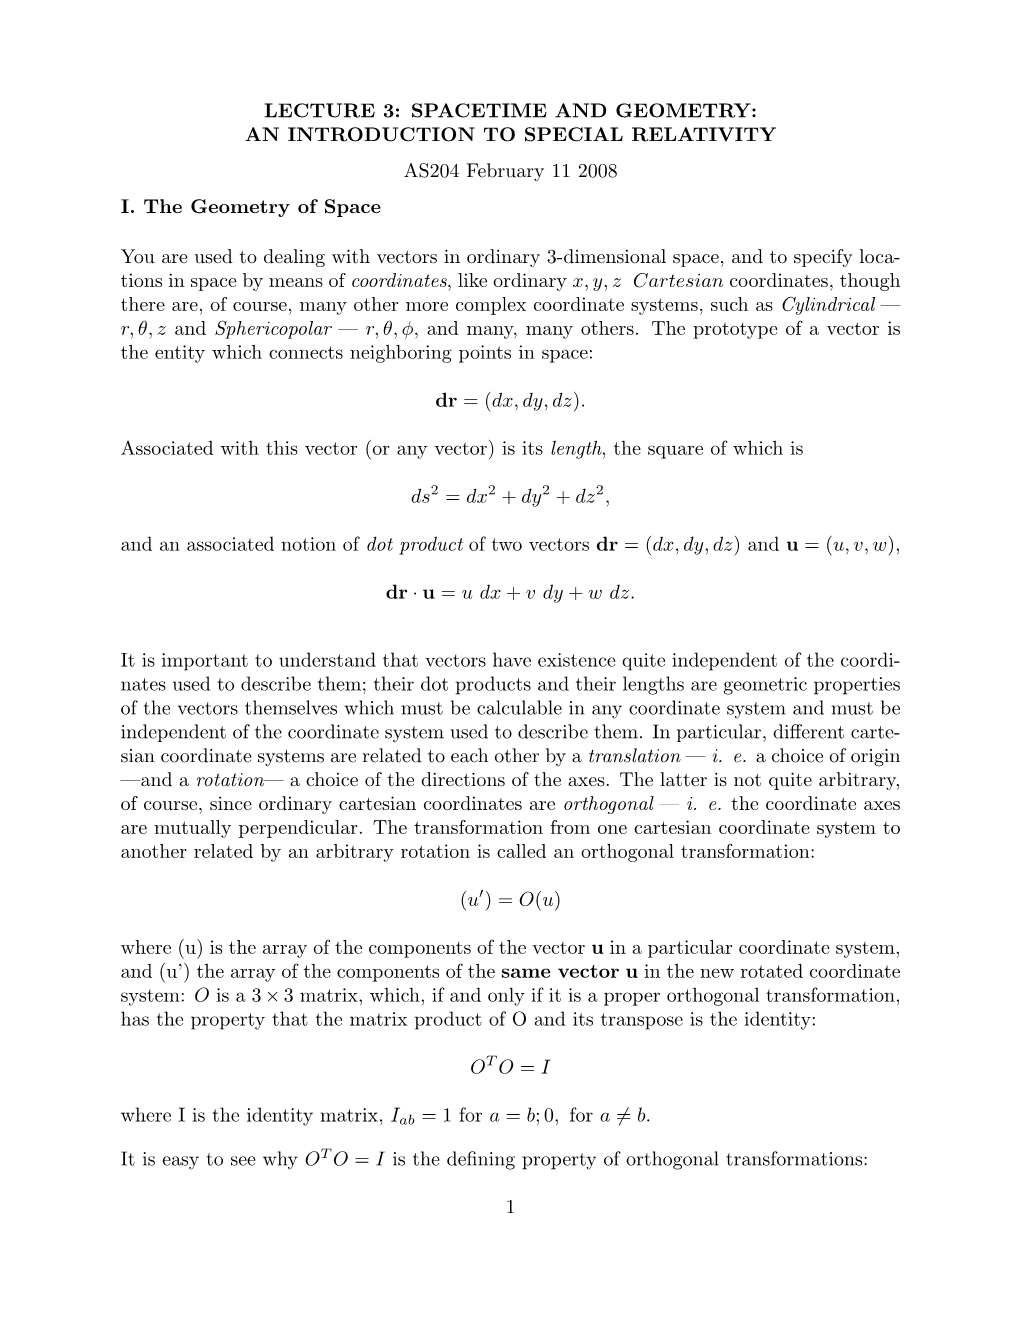 LECTURE 3: SPACETIME and GEOMETRY: an INTRODUCTION to SPECIAL RELATIVITY AS204 February 11 2008 I